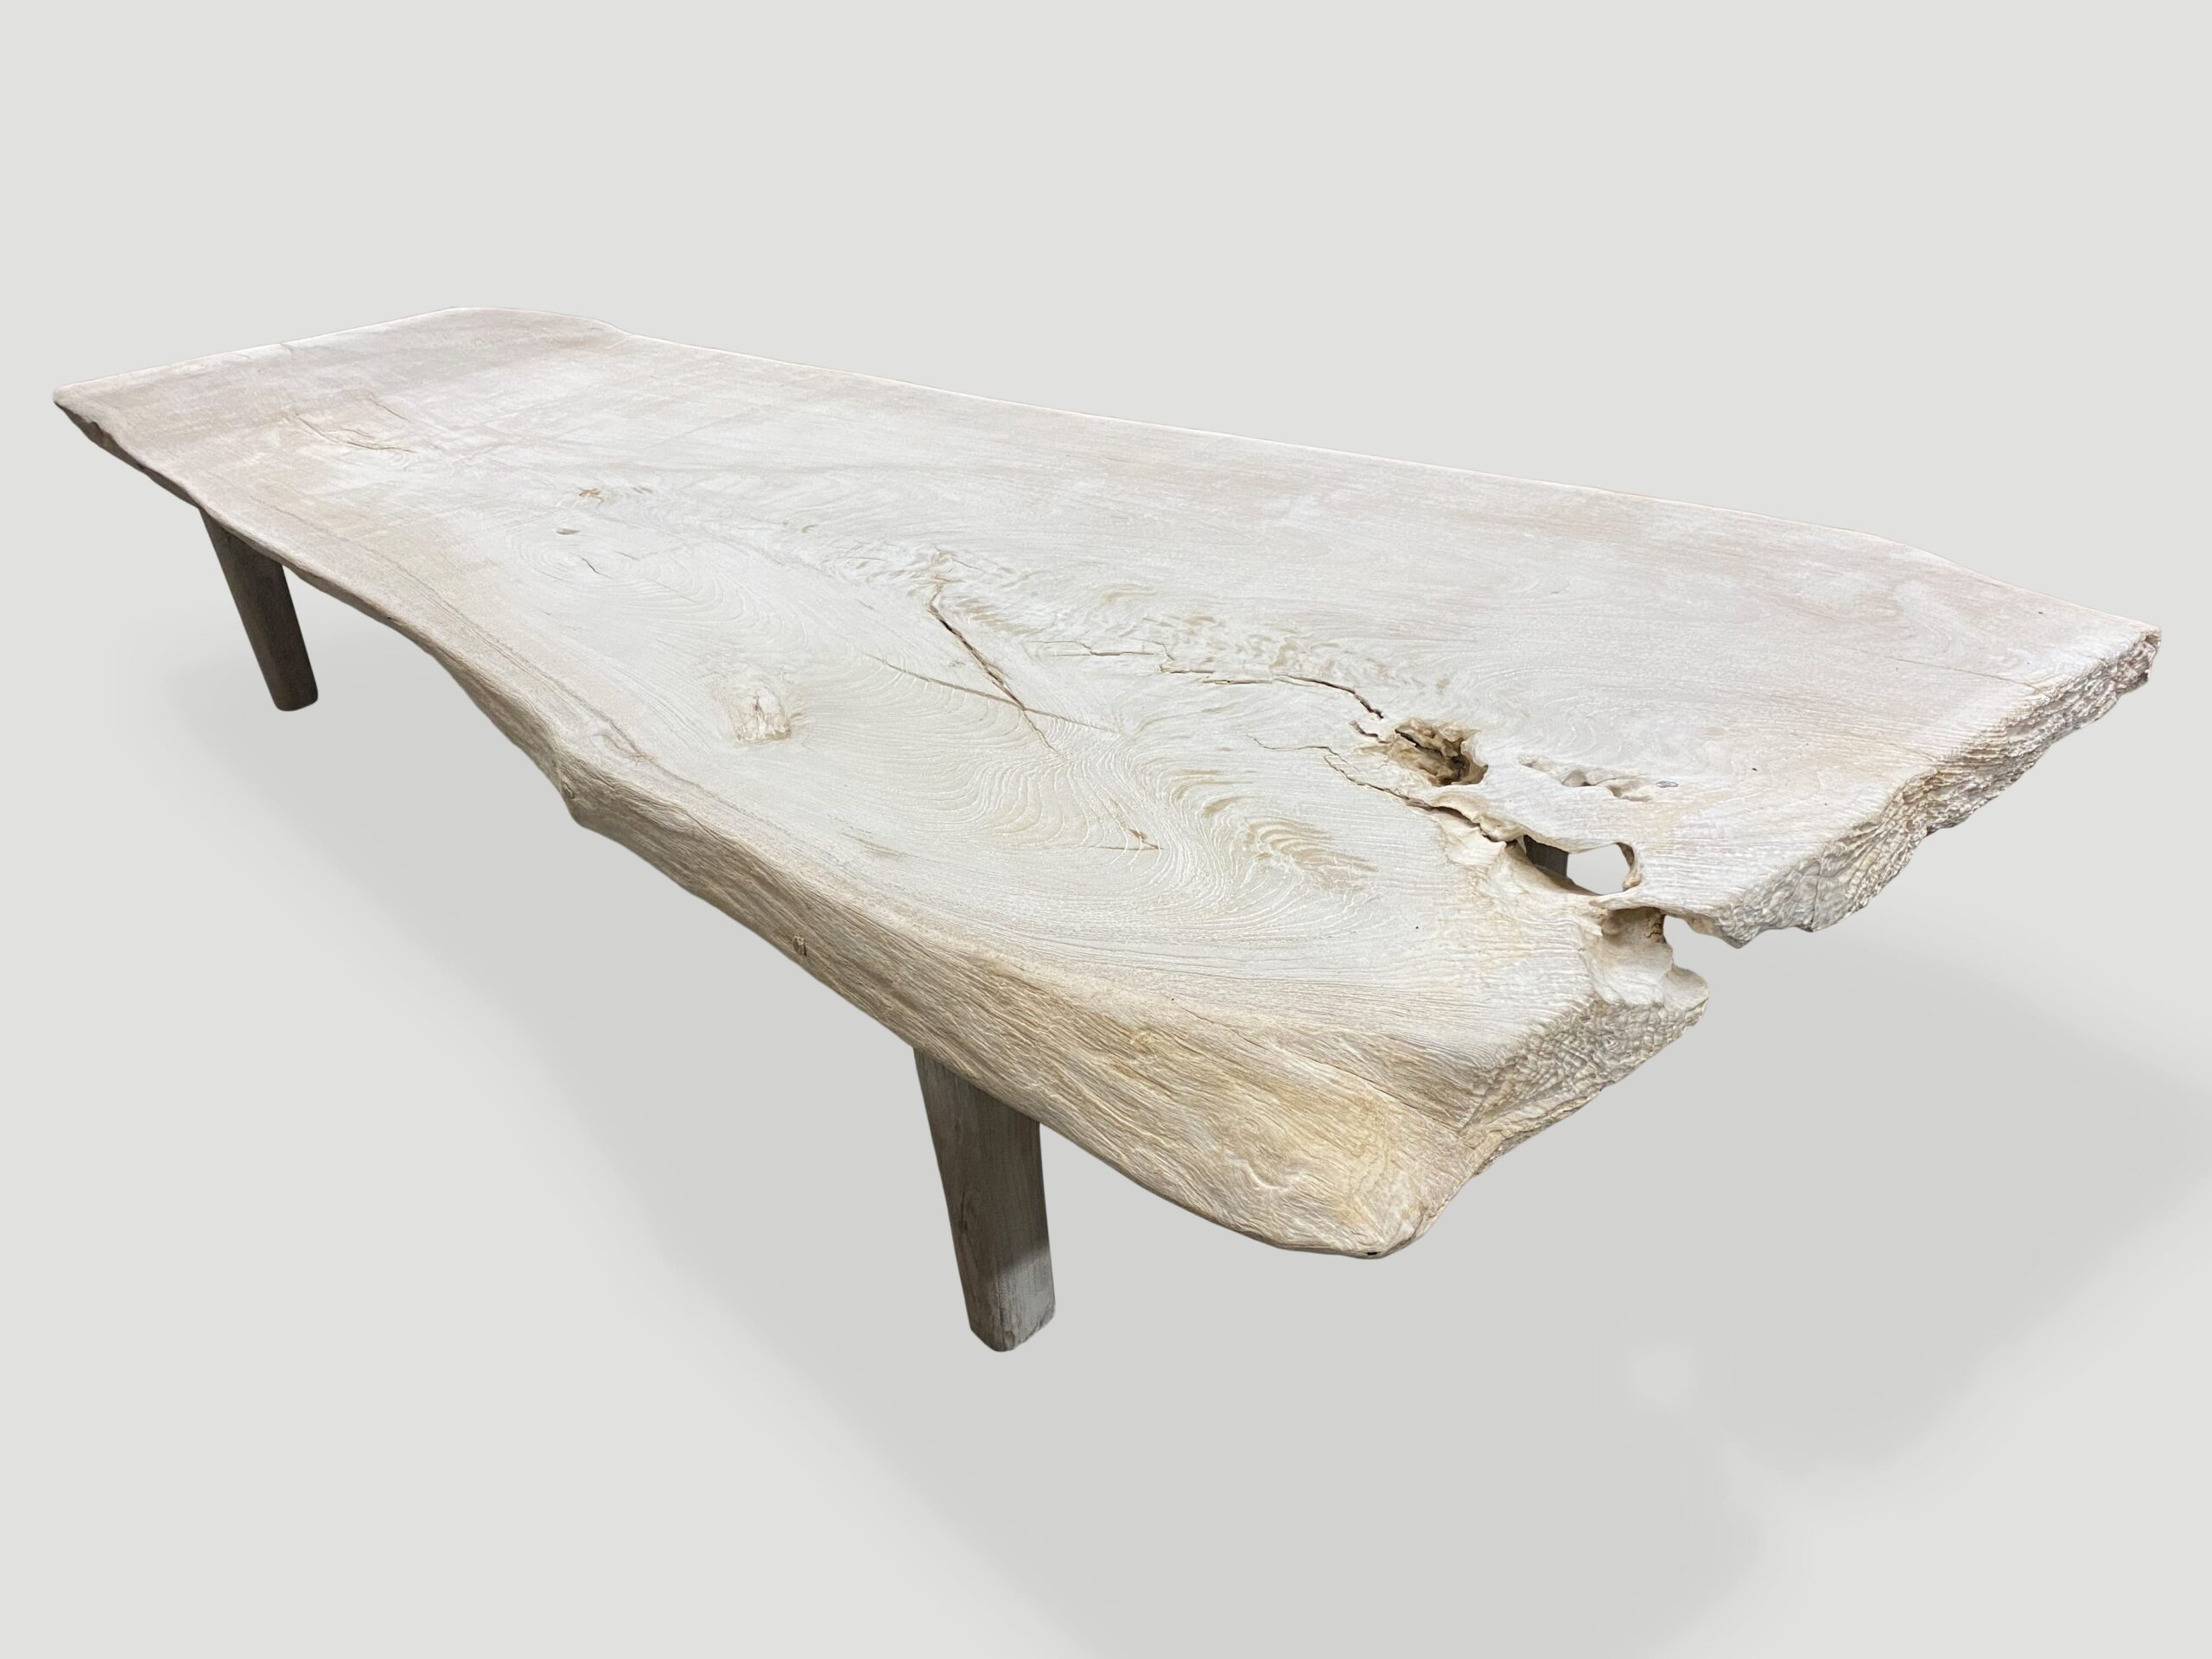 bleached teak coffee table or bench with natural erosion